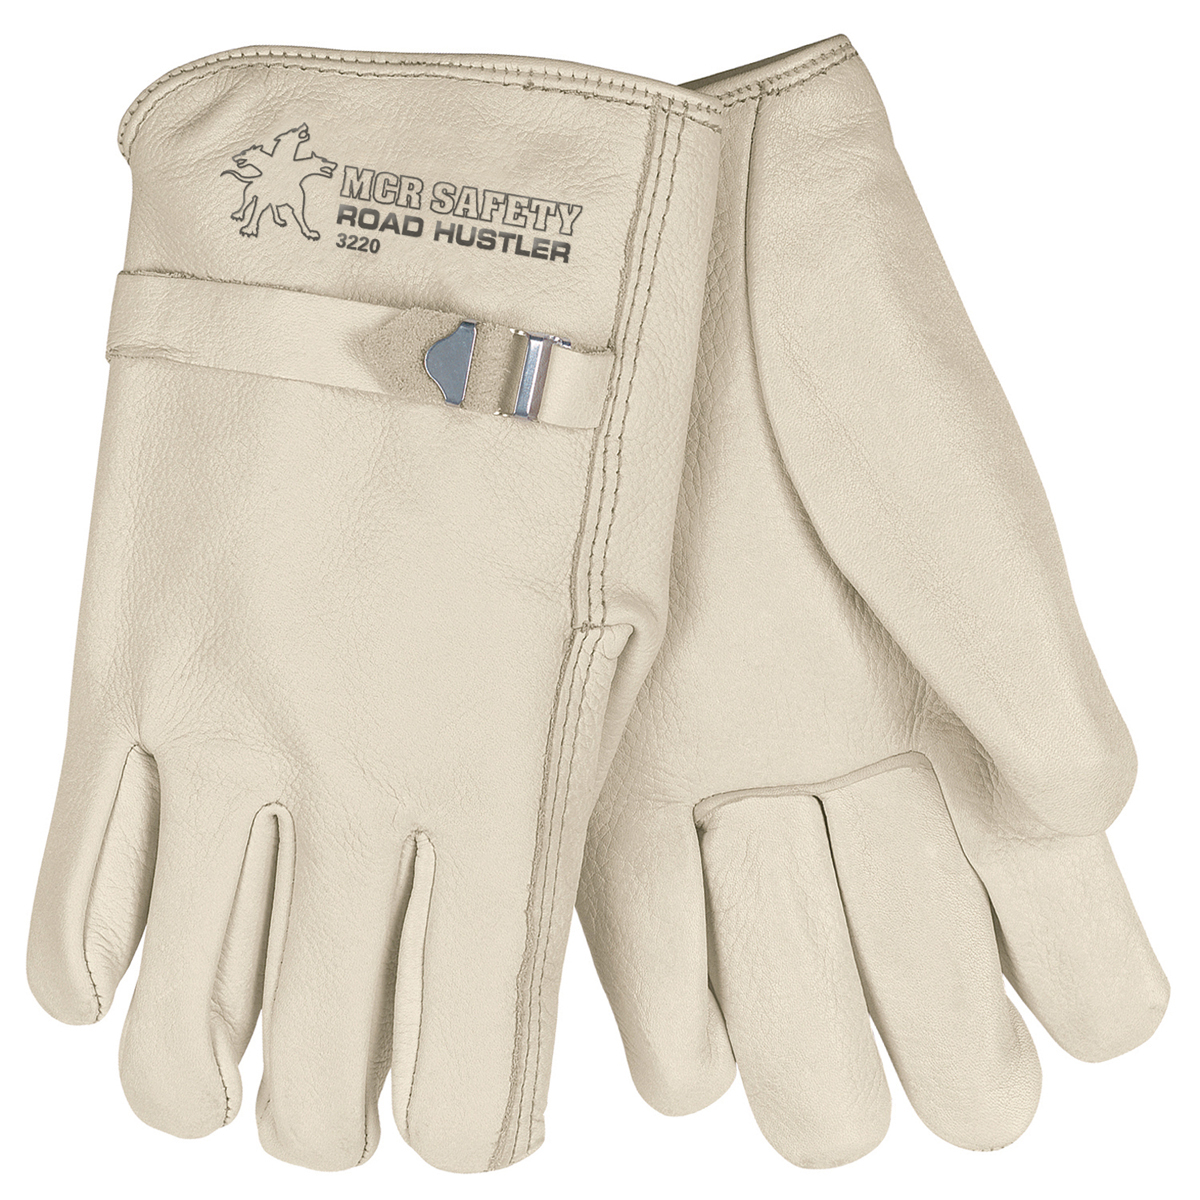 Memphis Glove Medium Pearl Premium Cowhide Unlined Drivers Gloves With Rolled Leather Hem